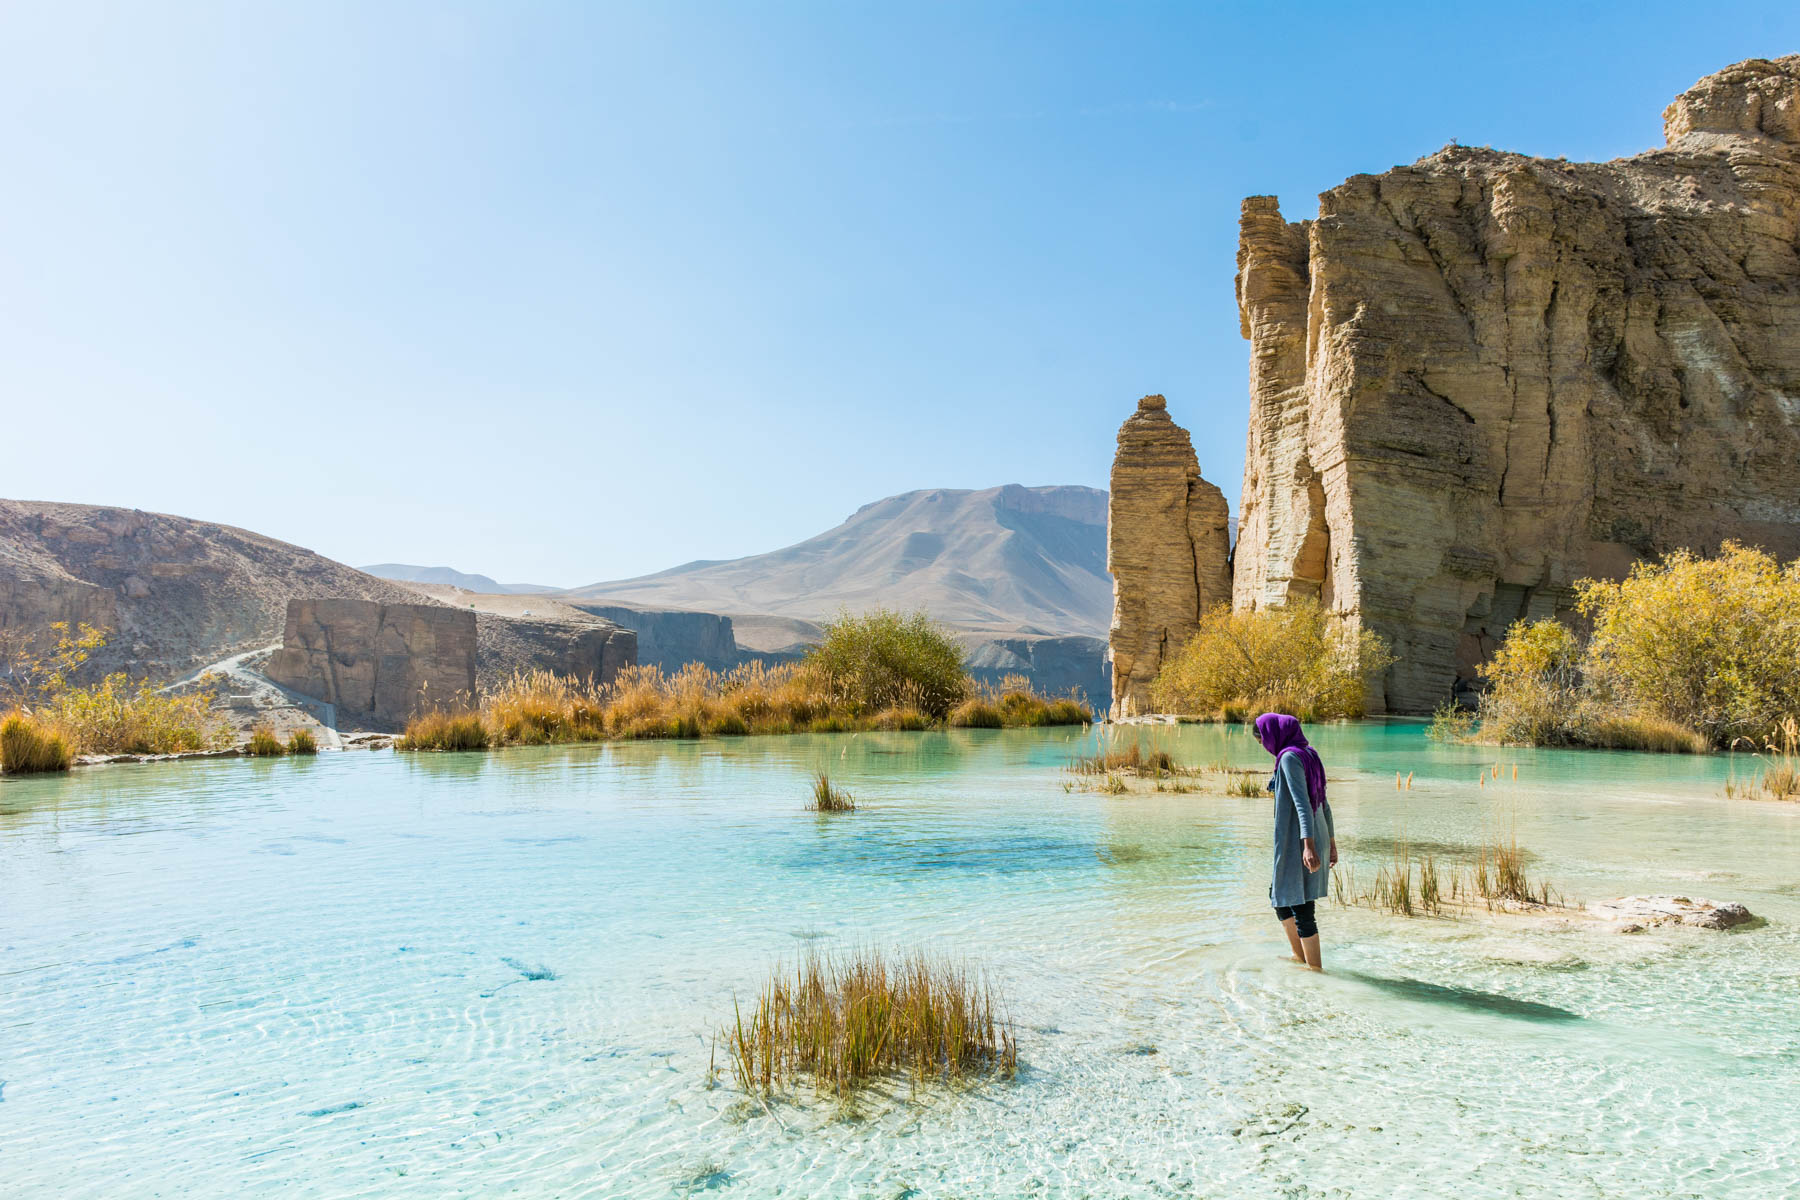 Wearing hijab, Islamic modest dress, in Band-e-Amir, Afghanistan - Lost With Purpose